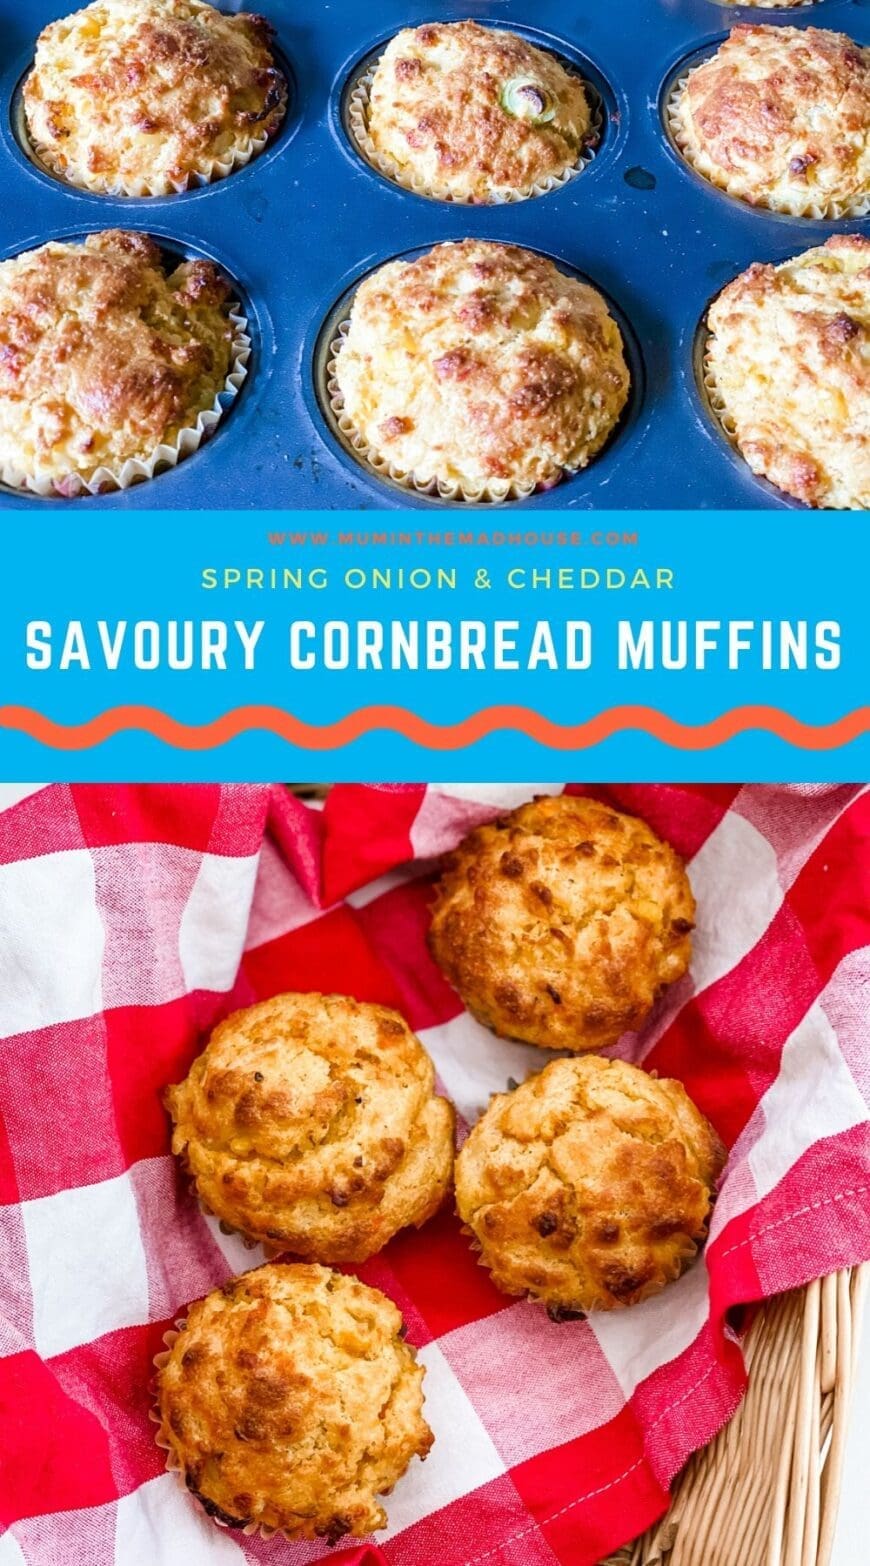 Savoury Cornbread Muffins are the perfect side dish for chilli or even breakfast.  Simple to make, but a real game changer